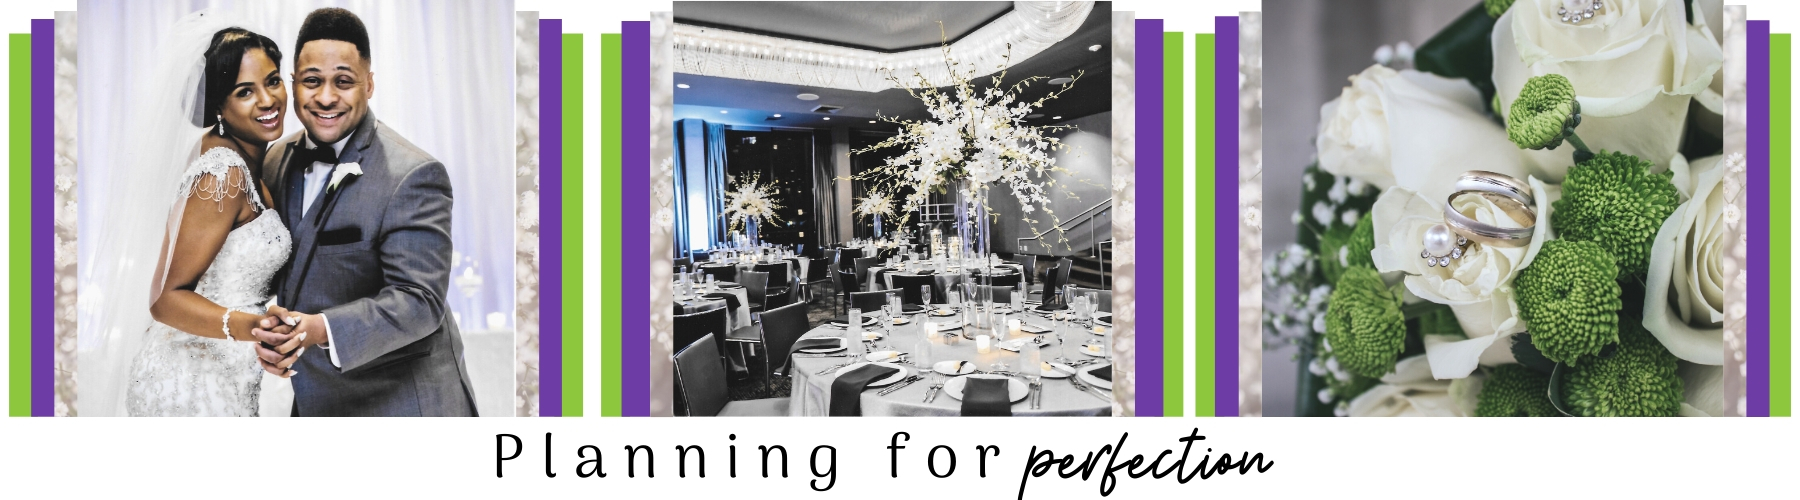 Wedding planner for a perfect wedding